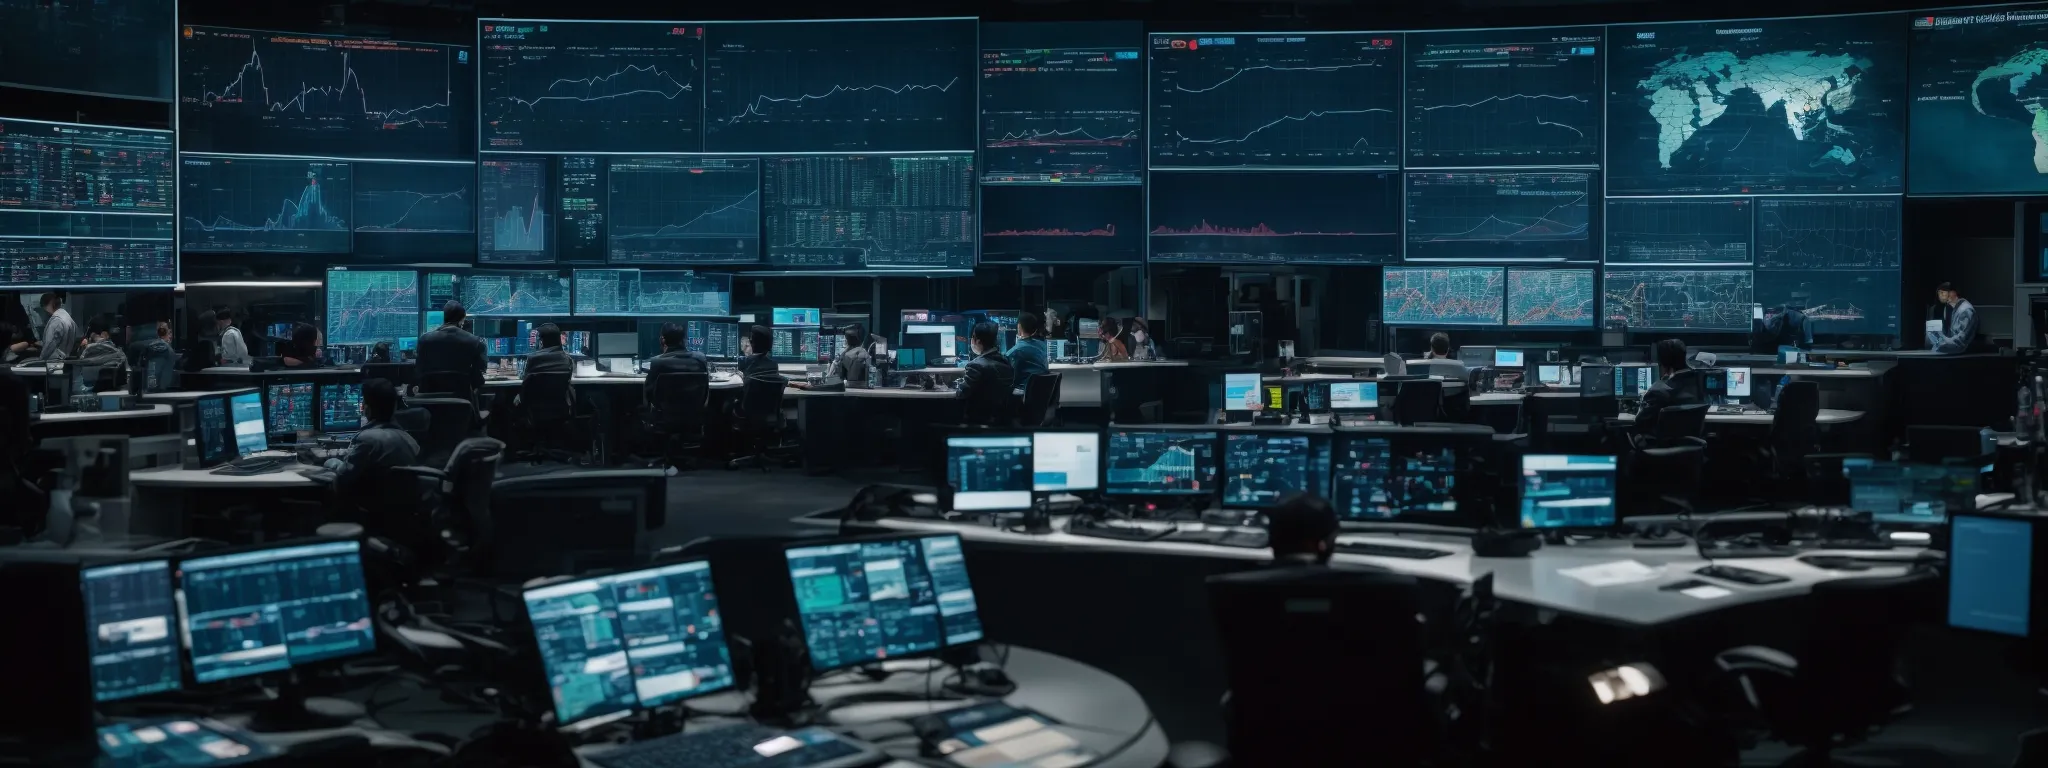 a futuristic control room with large screens displaying graphs and analytics, overseen by professionals engaged in strategic planning.